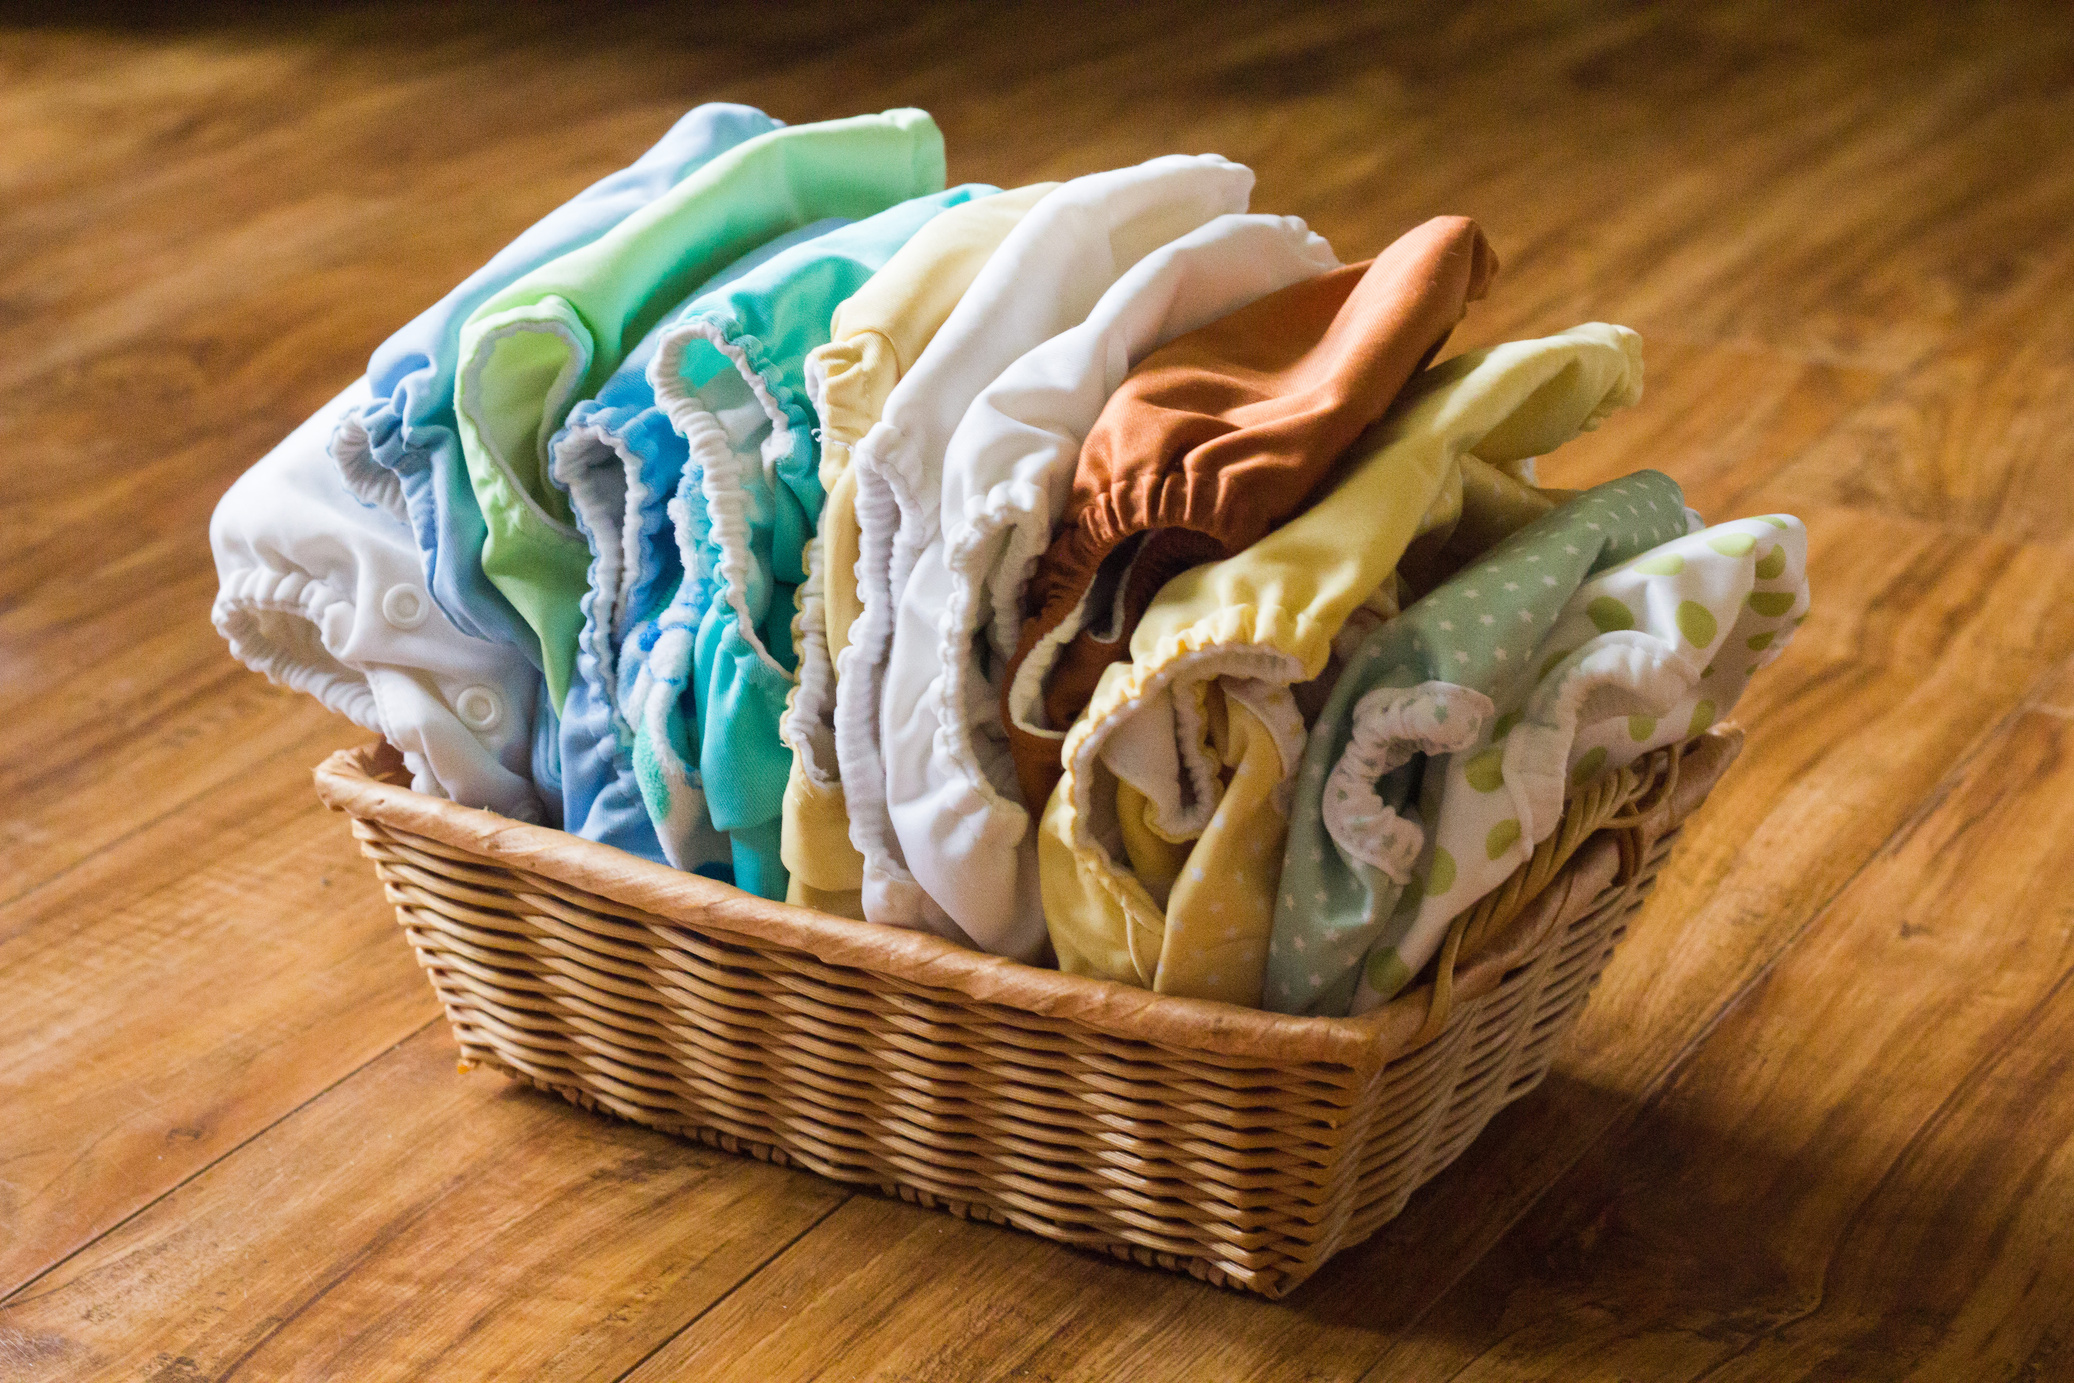 Cloth Diapers in a basket